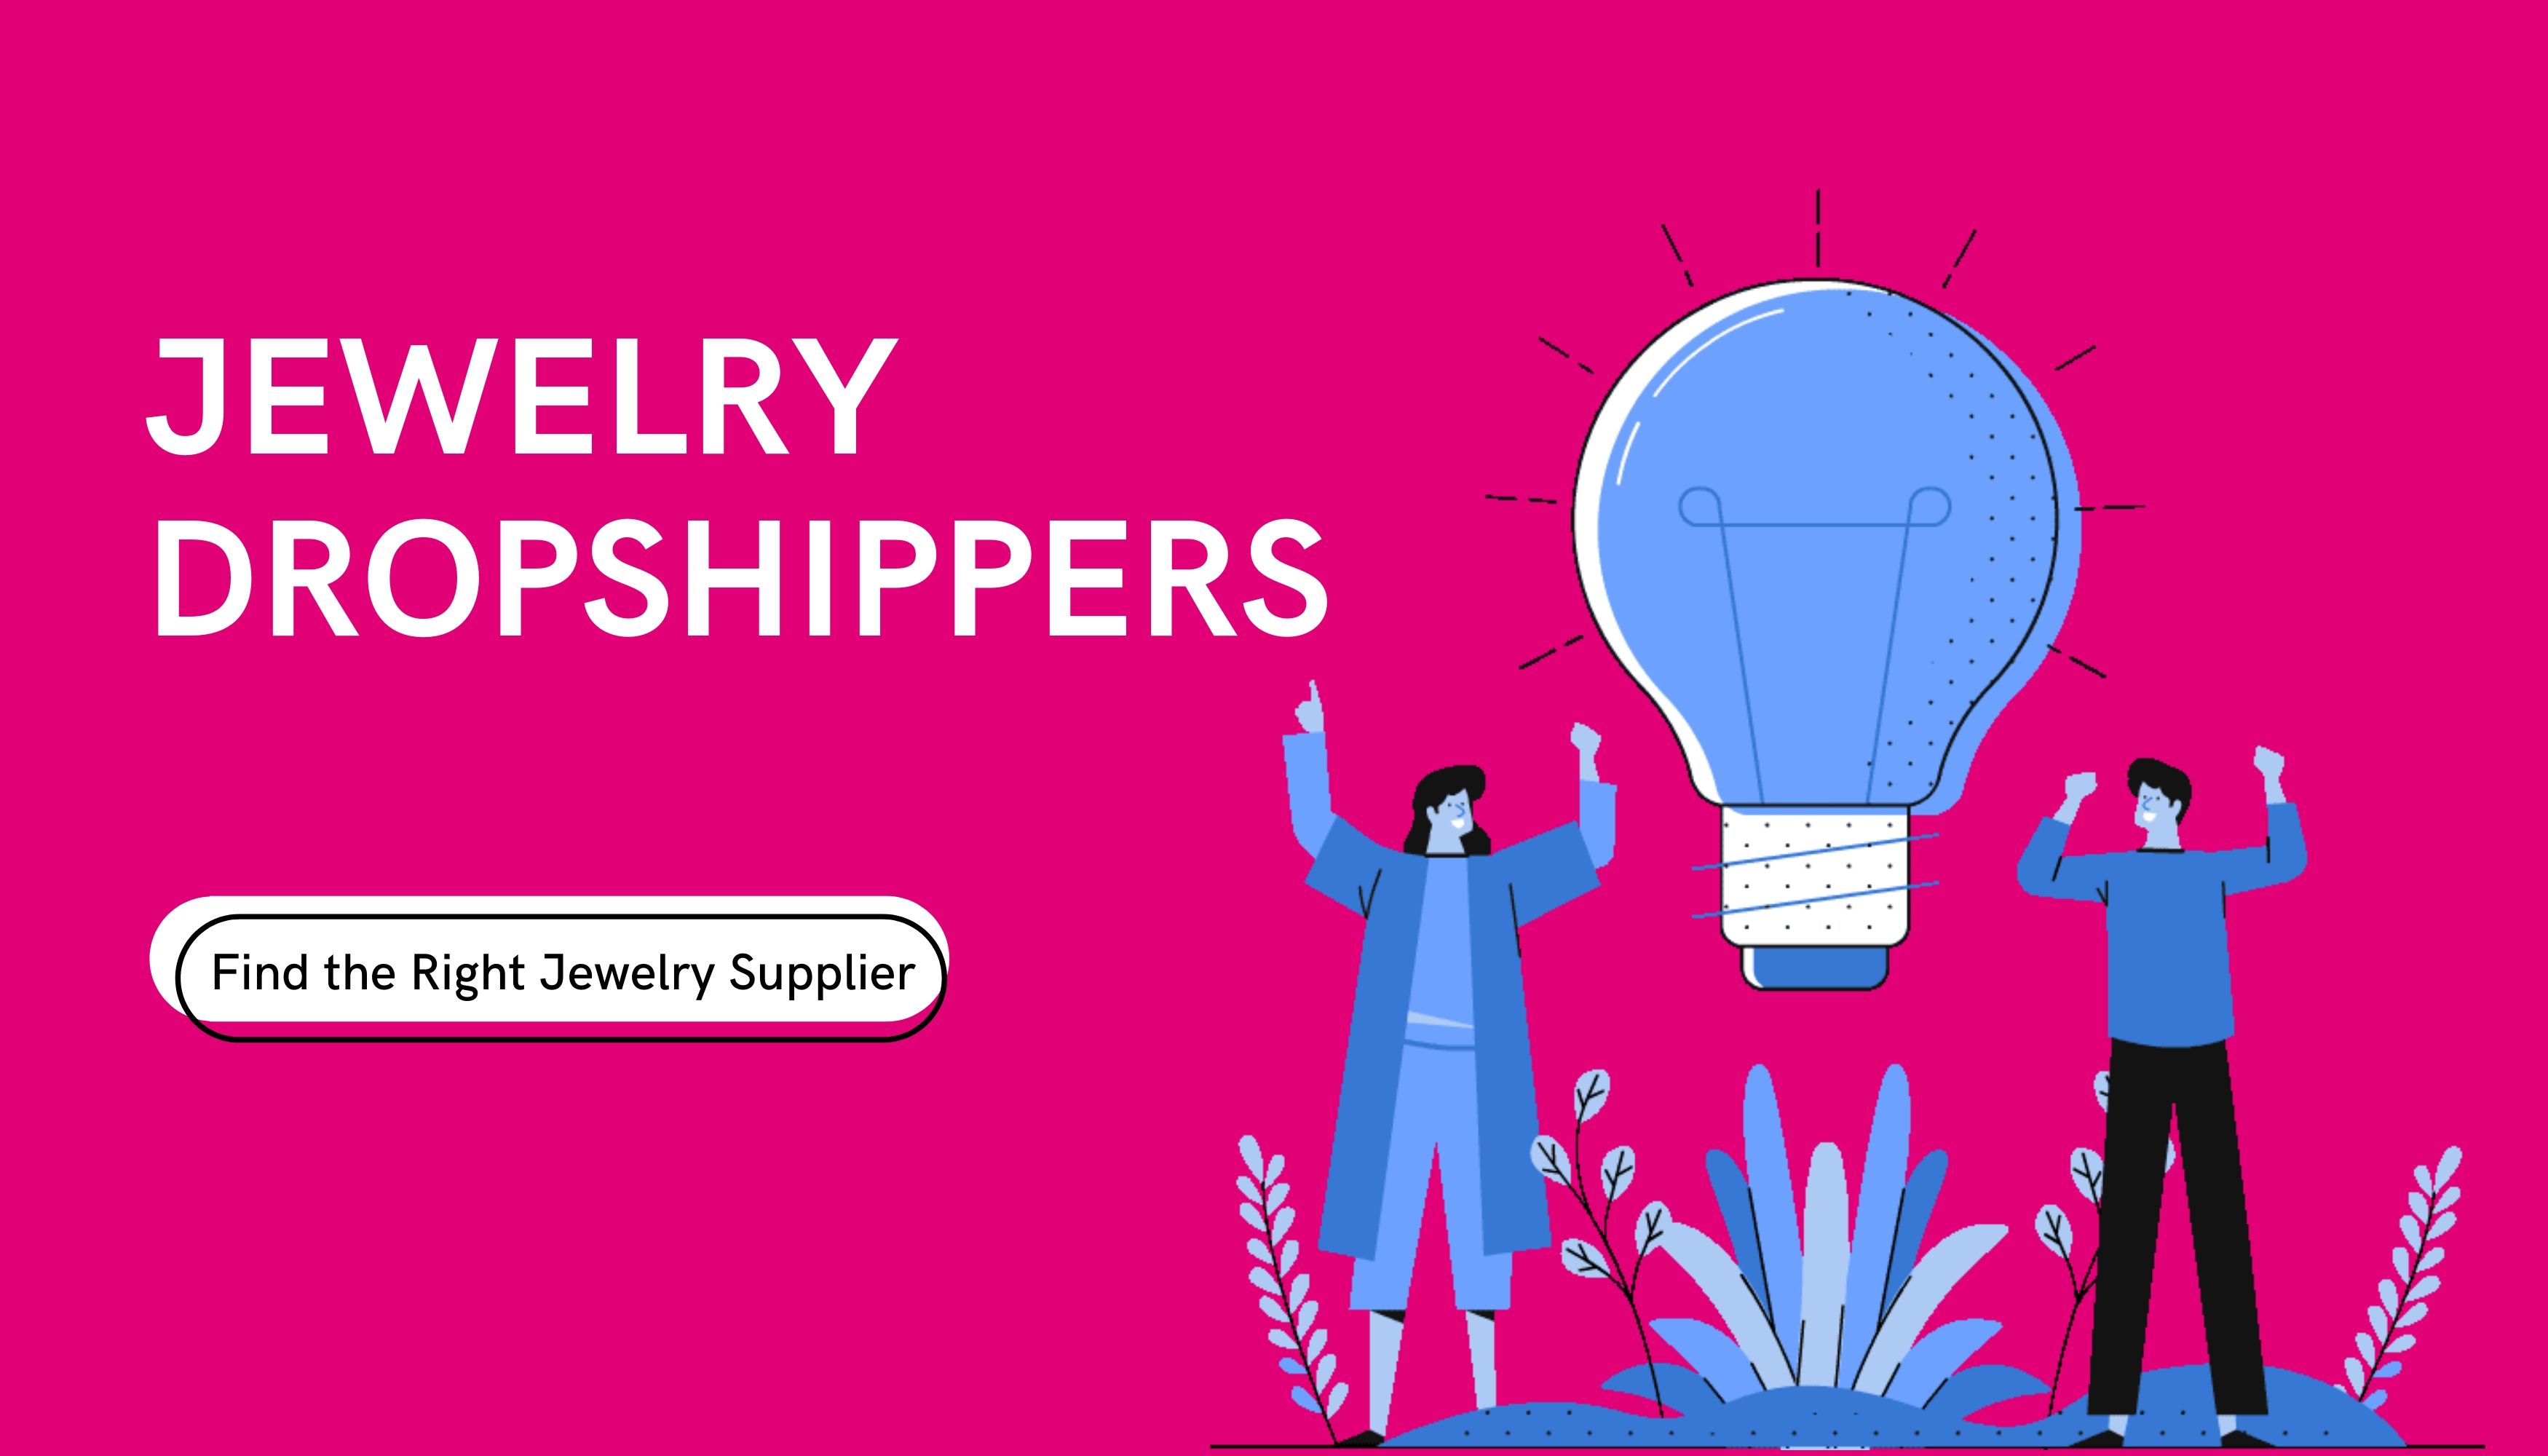 Jewelry Dropshippers: Find Best Jewelry Suppliers to Dropship